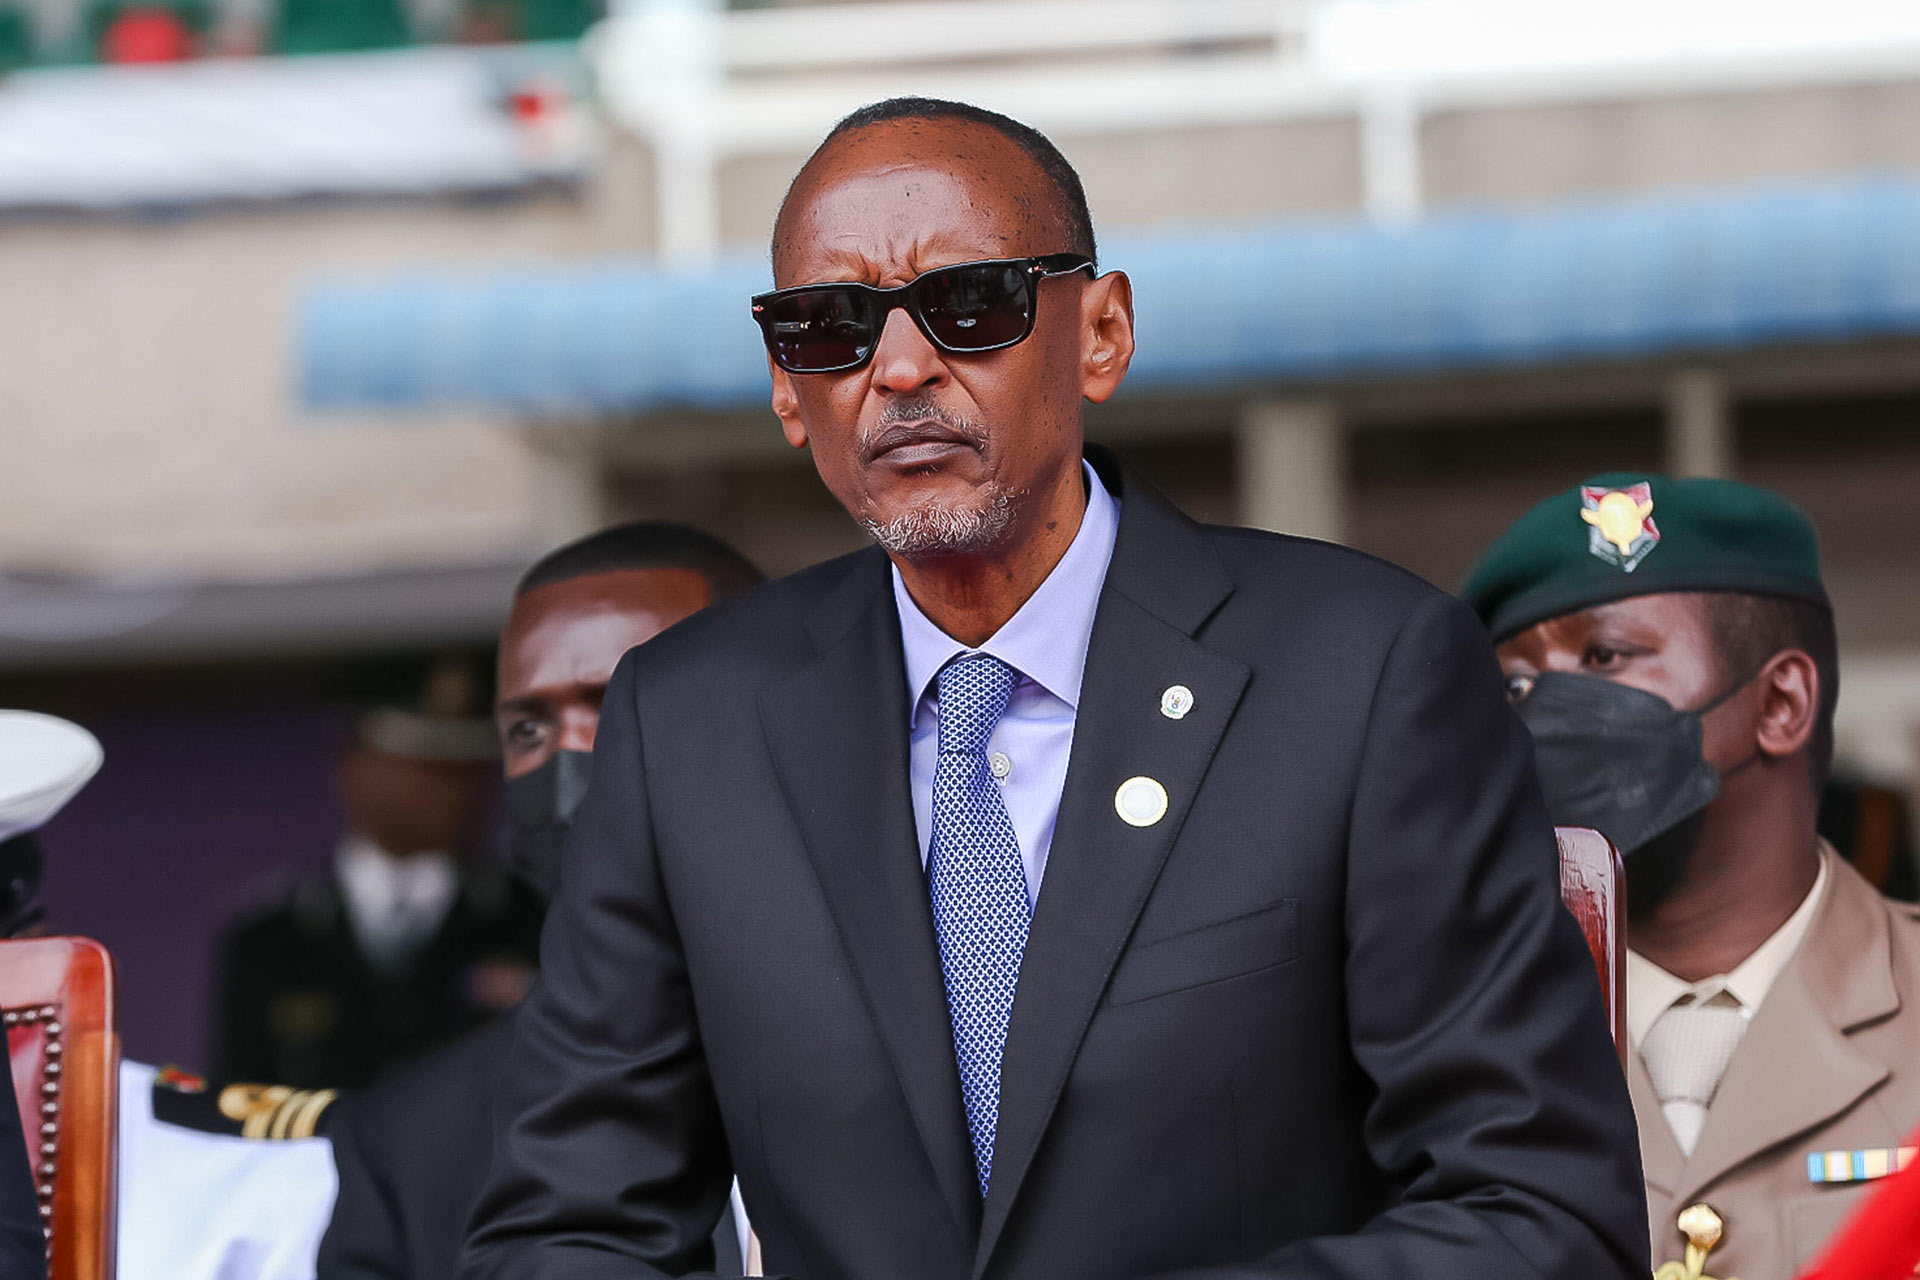 Rwanda Fed False Intelligence to U.S. and Interpol As It Pursued Political Dissidents Abroad